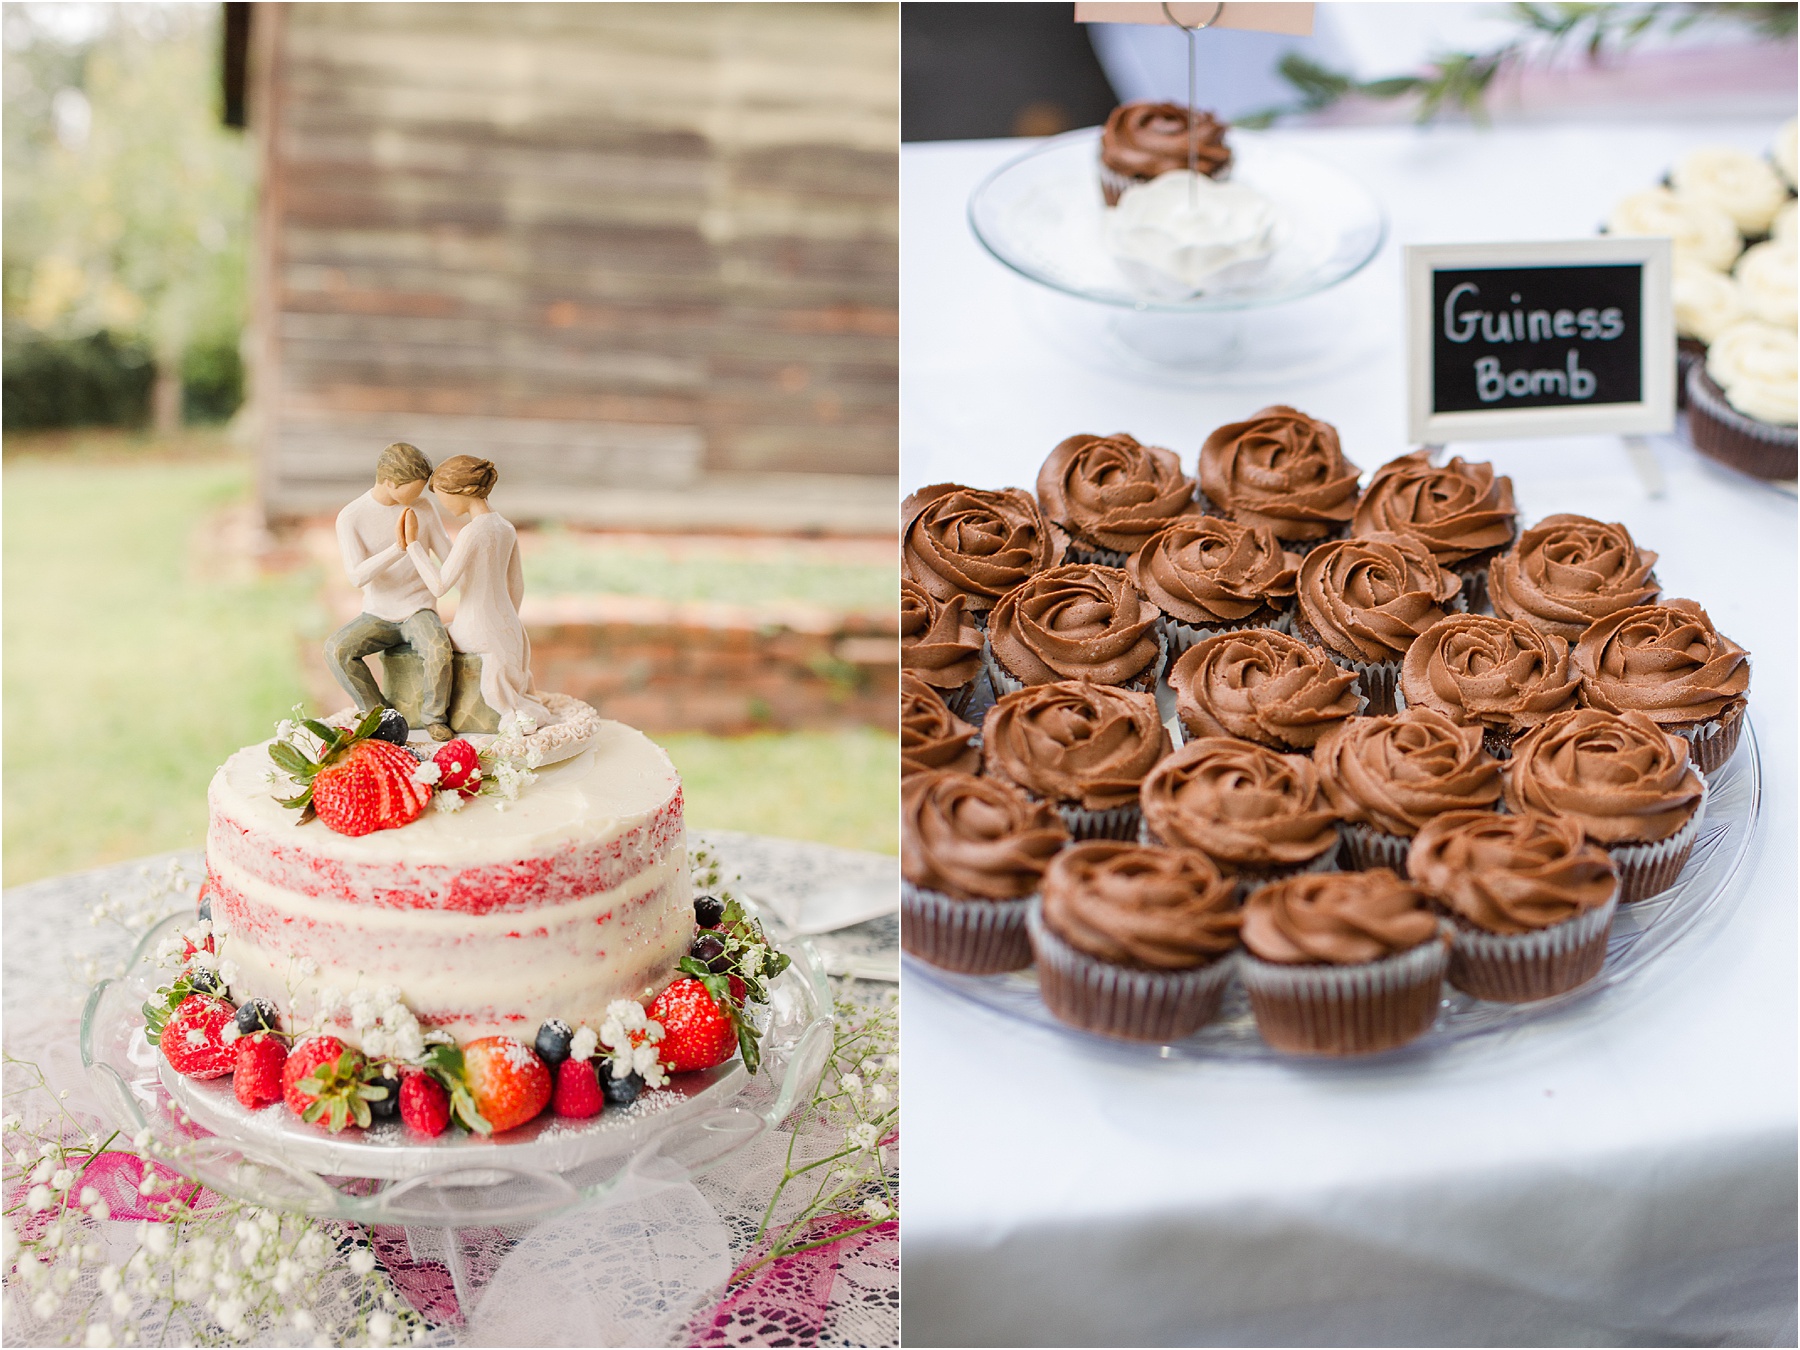 strawberry wedding cake and chocolate cupcakes before wedding reception in georgia